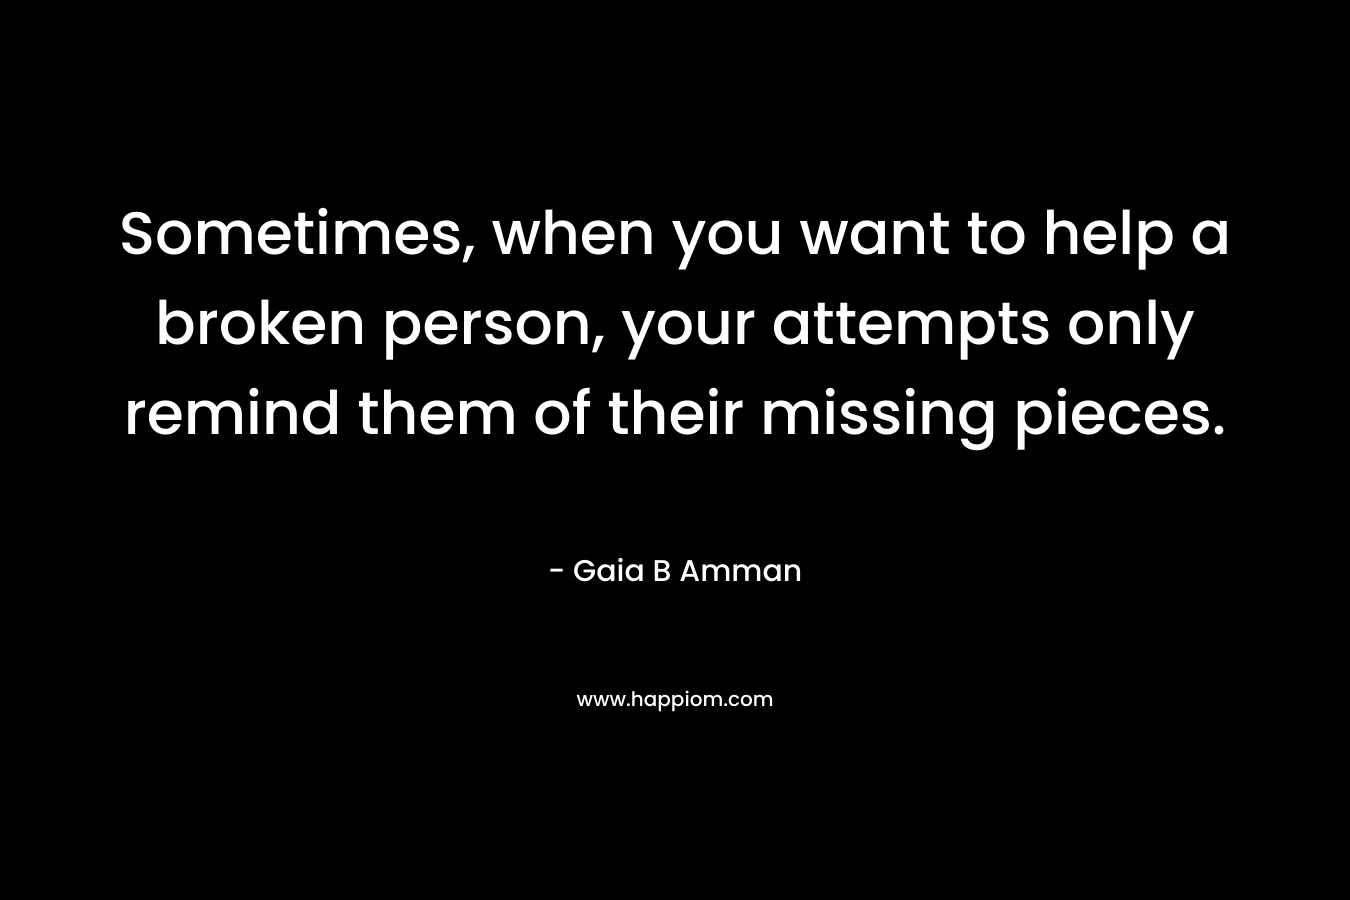 Sometimes, when you want to help a broken person, your attempts only remind them of their missing pieces. – Gaia B Amman